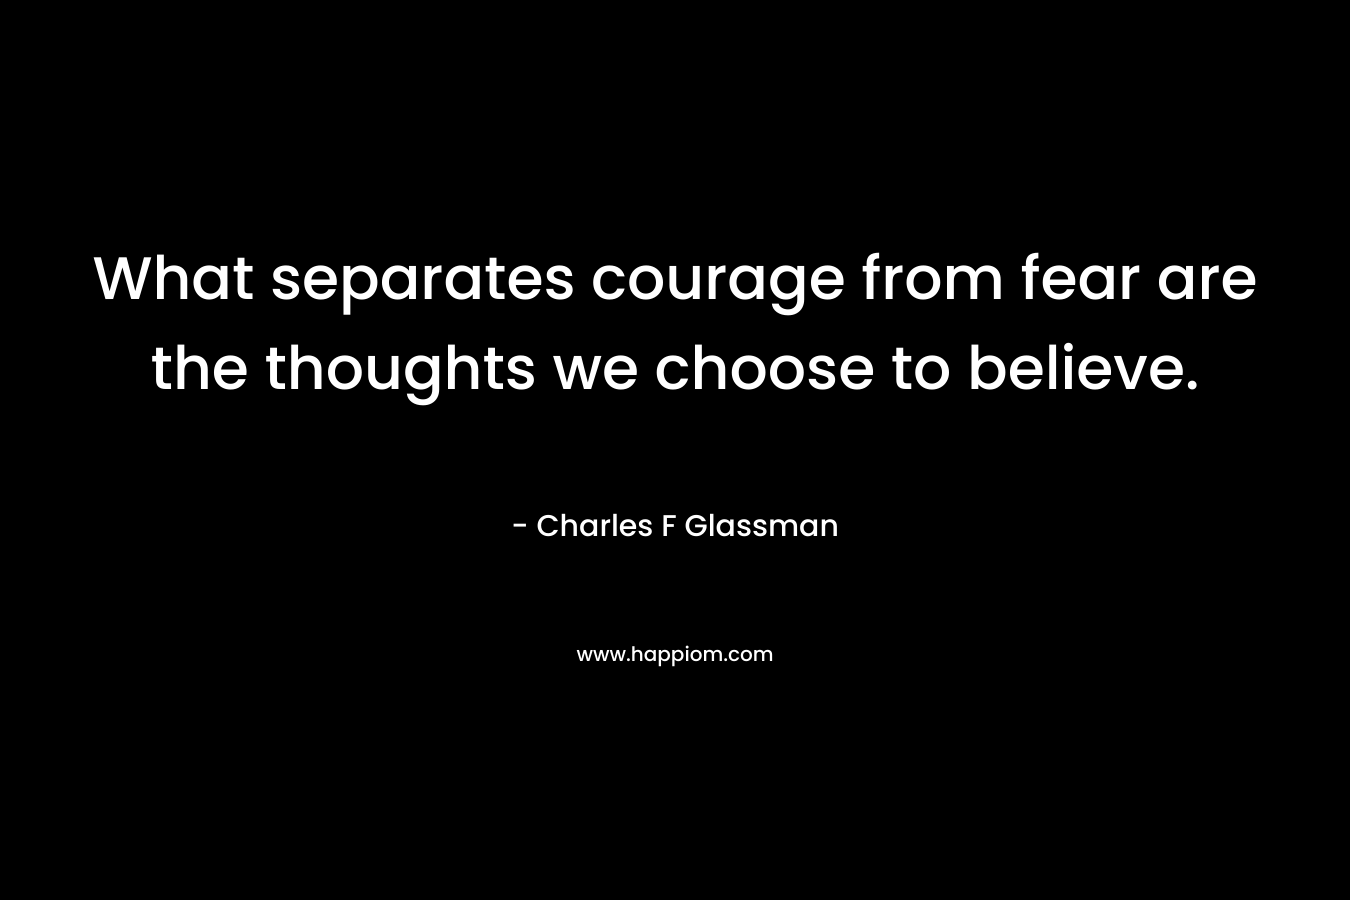 What separates courage from fear are the thoughts we choose to believe.